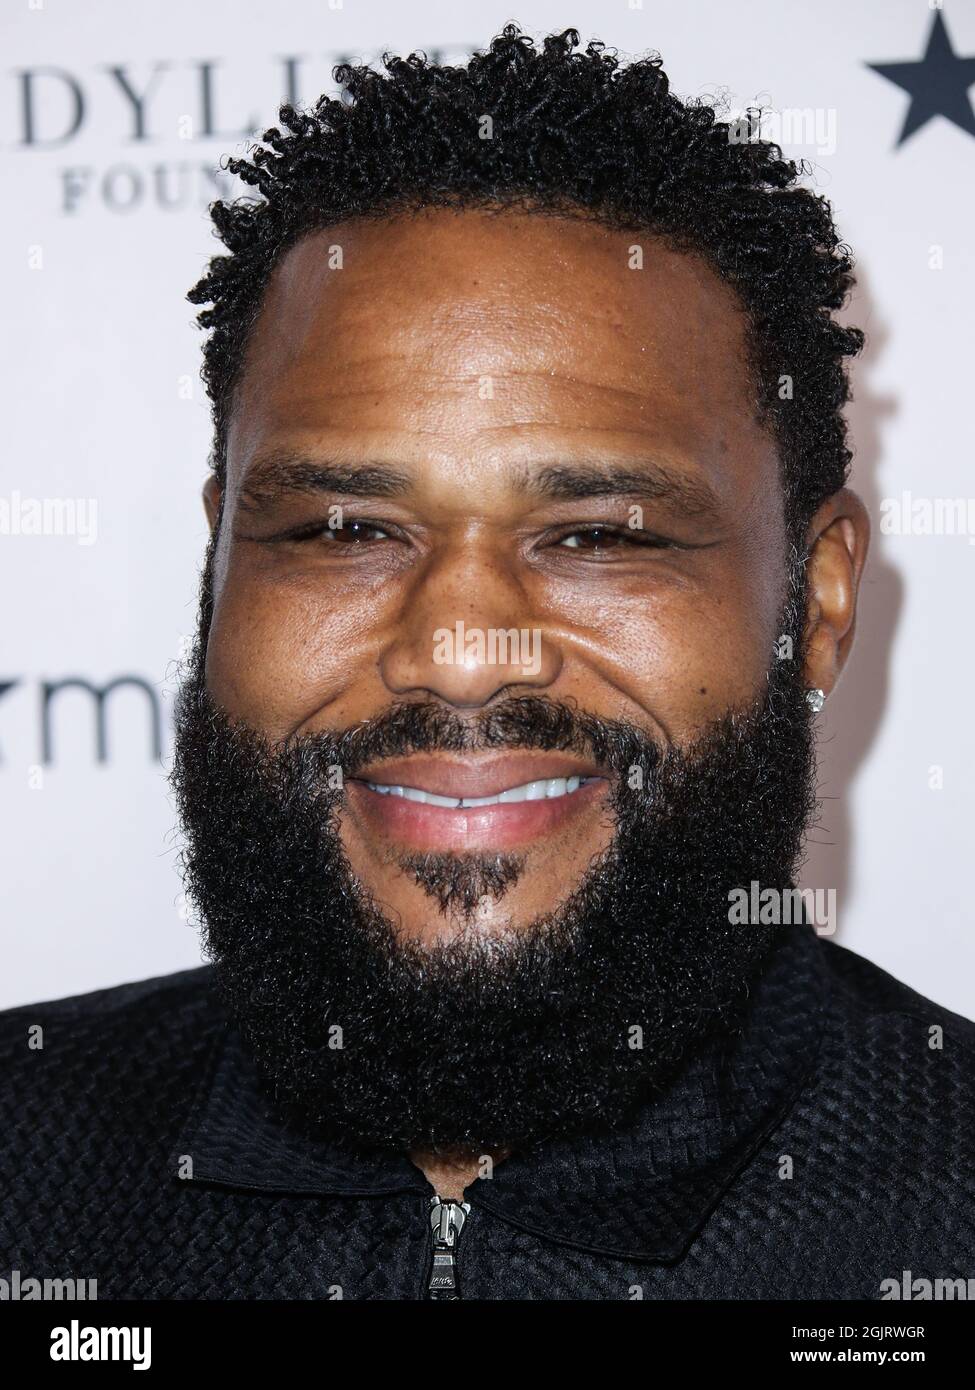 BEVERLY HILLS, LOS ANGELES, CALIFORNIA, USA - SEPTEMBER 11: Actor Anthony Anderson arrives at the 12th Annual LadyLike Foundation Women Of Excellence Awards And Fashion Show held at The Beverly Hilton Hotel on September 11, 2021 in Beverly Hills, Los Angeles, California, United States. (Photo by Xavier Collin/Image Press Agency) Stock Photo